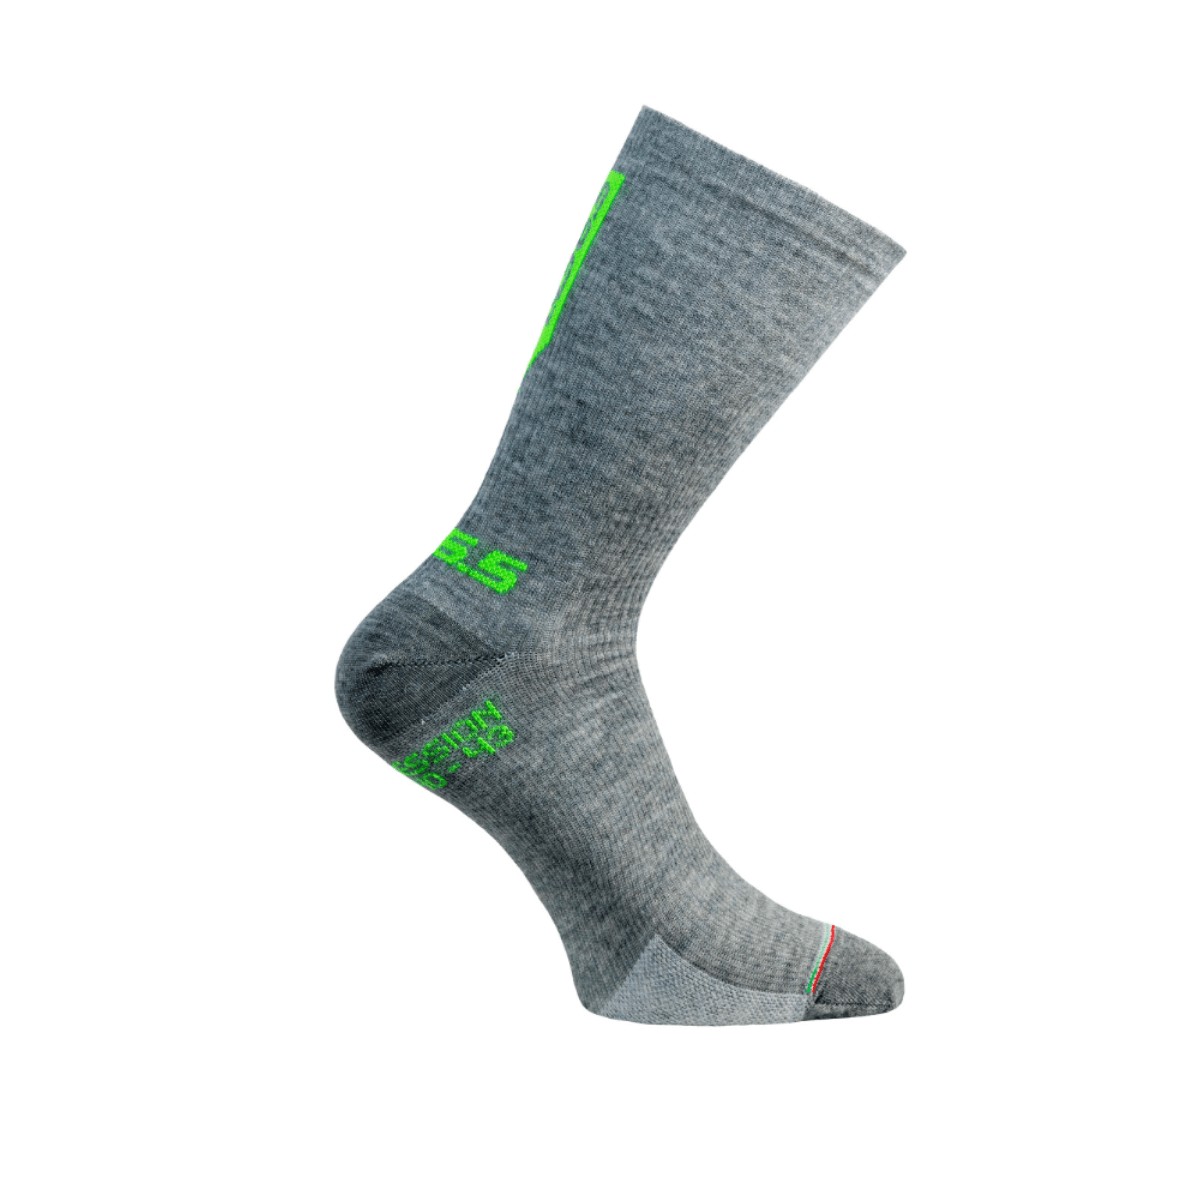 Chaussettes Q36.5 Wool Compression Gris, Taille 44-47